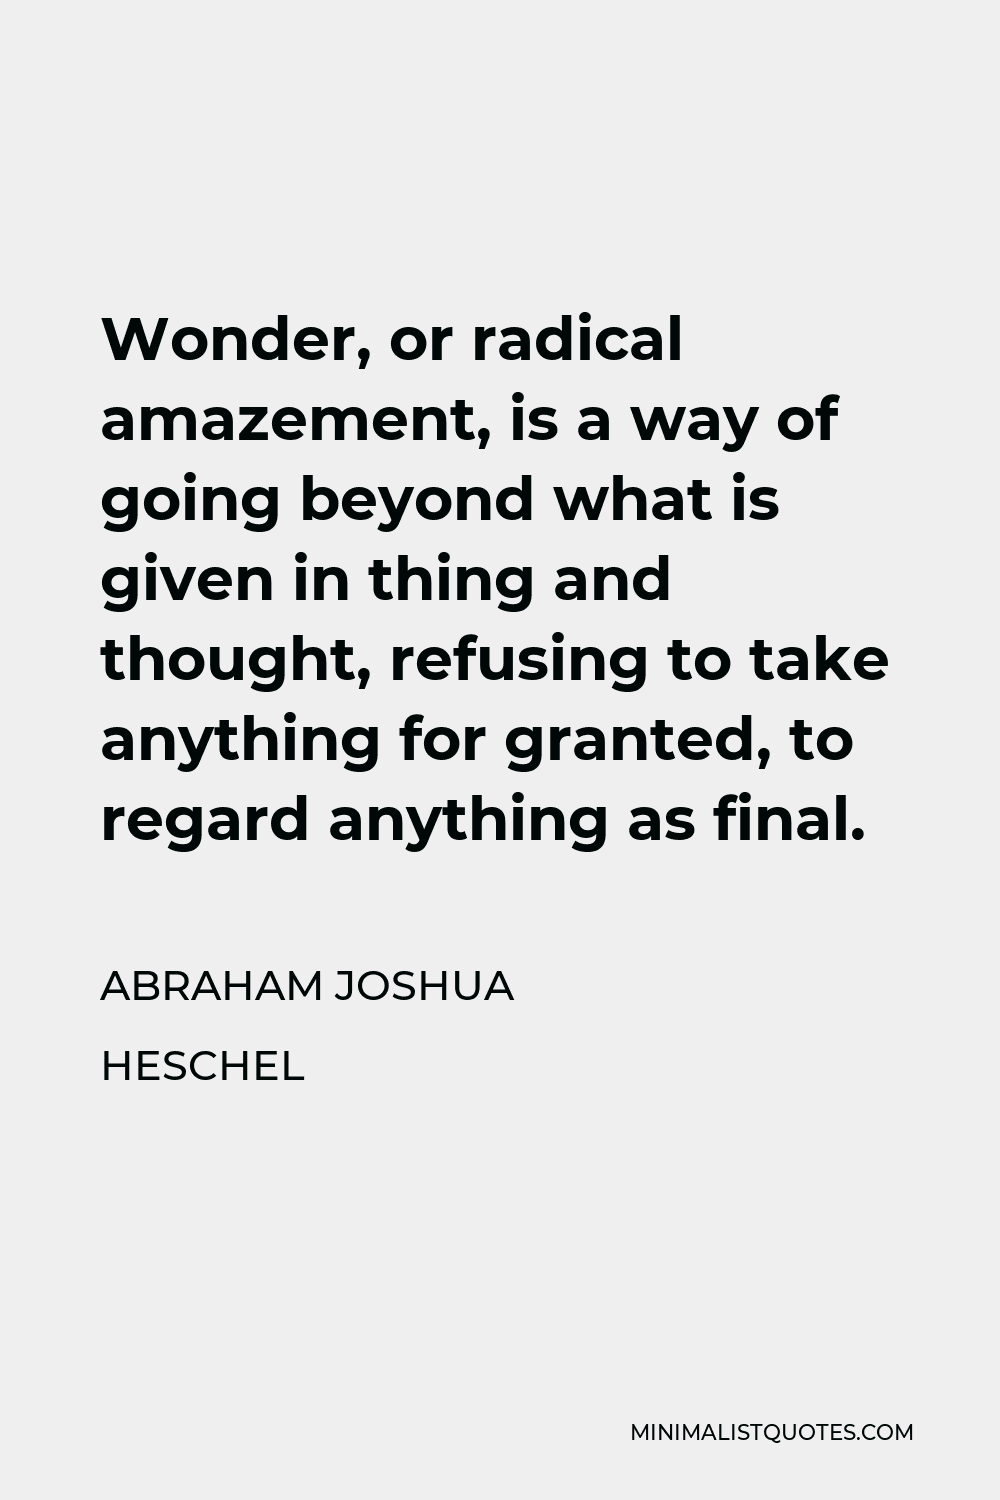 Abraham Joshua Heschel Quote - Wonder, or radical amazement, is a way of going beyond what is given in thing and thought, refusing to take anything for granted, to regard anything as final.